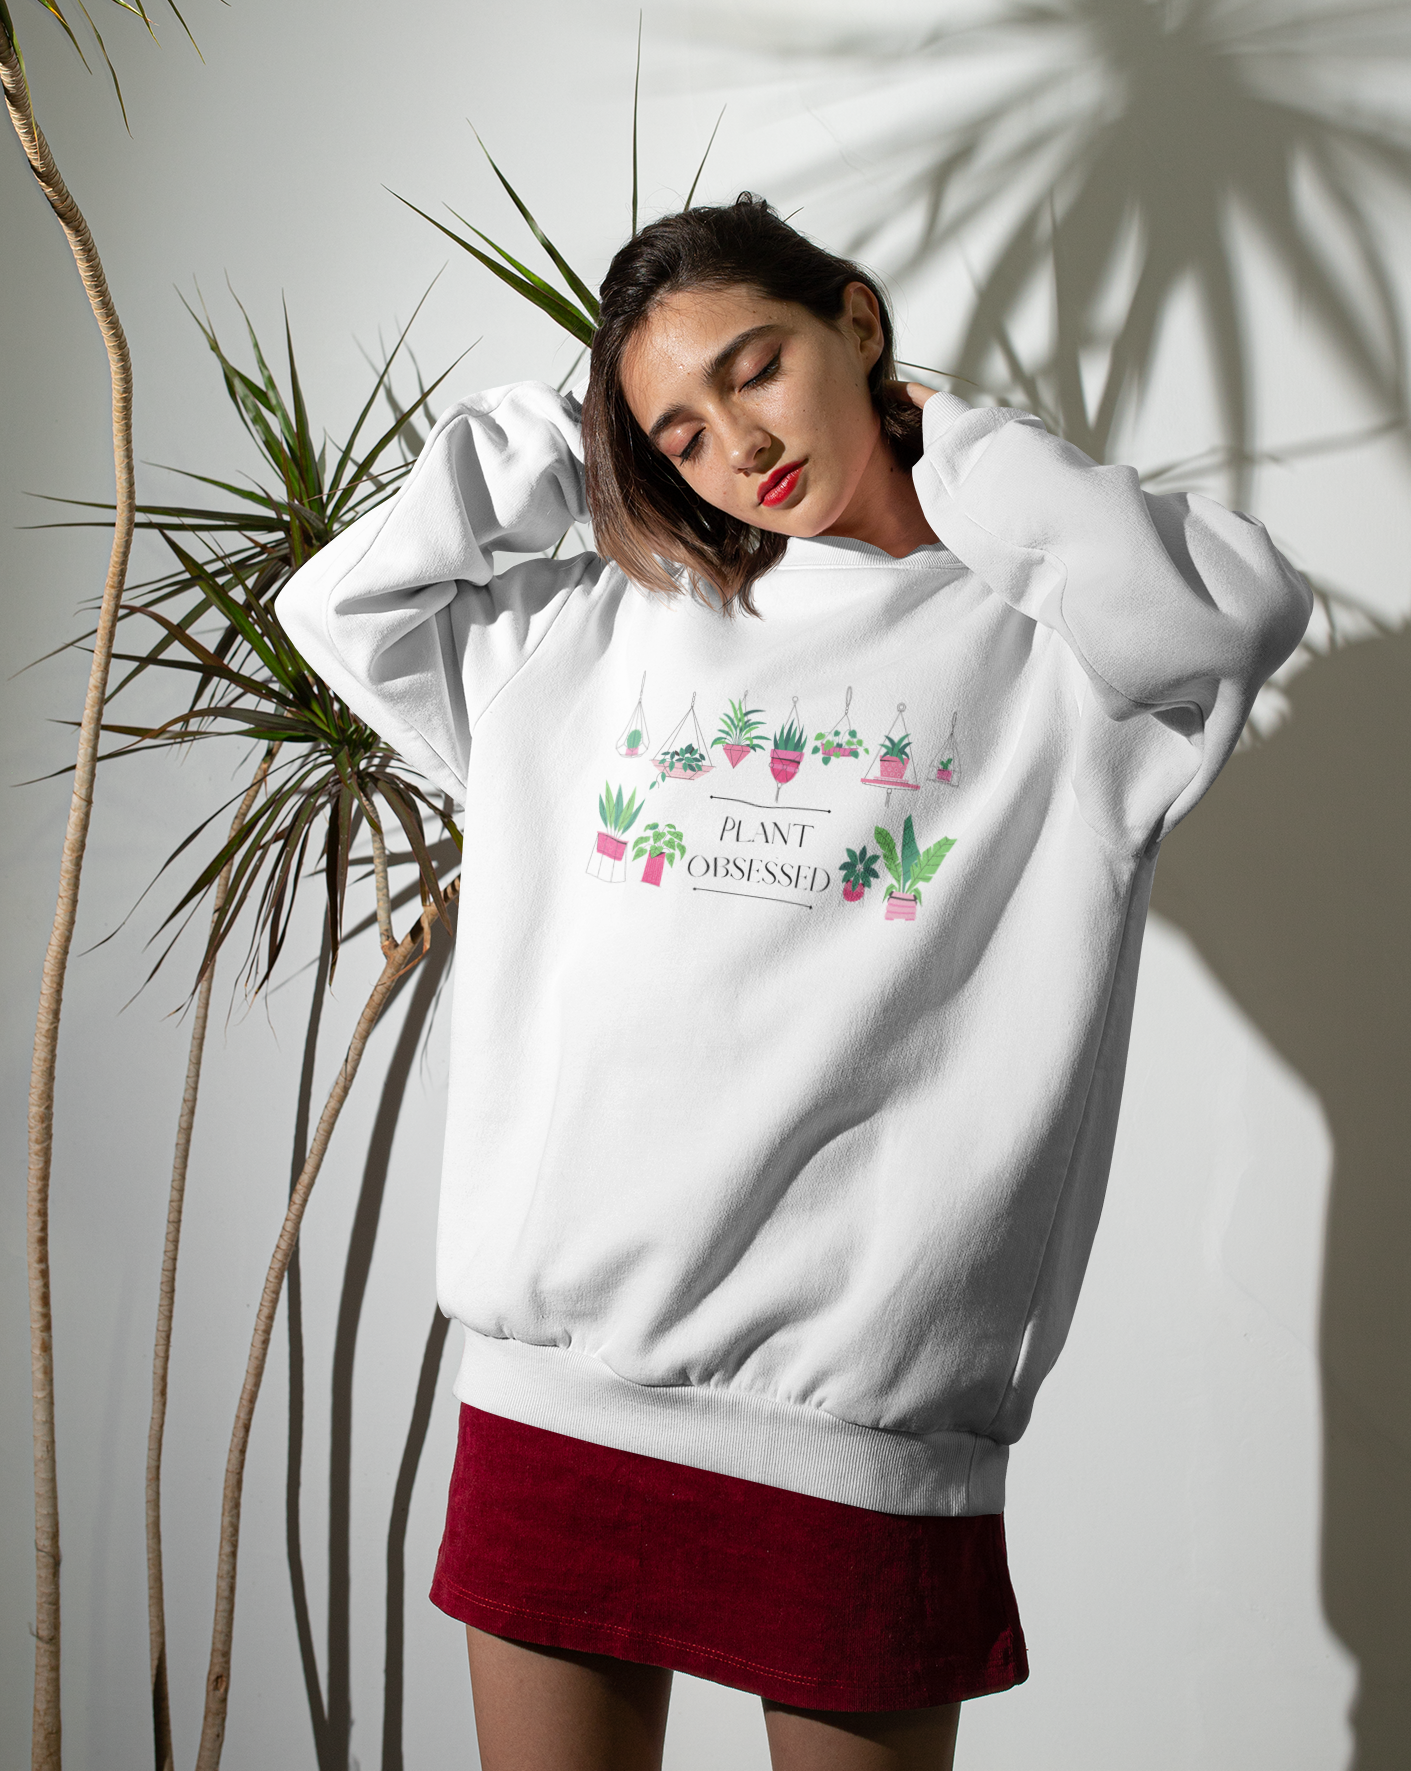 There is no such thing as too many plants. I mean, just one more right? This colorful crewneck sweatshirt has beautiful hanging plants and the phrase “Plant Obsessed”. Made with 100% cotton, this sweatshirt is both stylish and cozy. Treat yourself and show off your passion for plants with this piece.